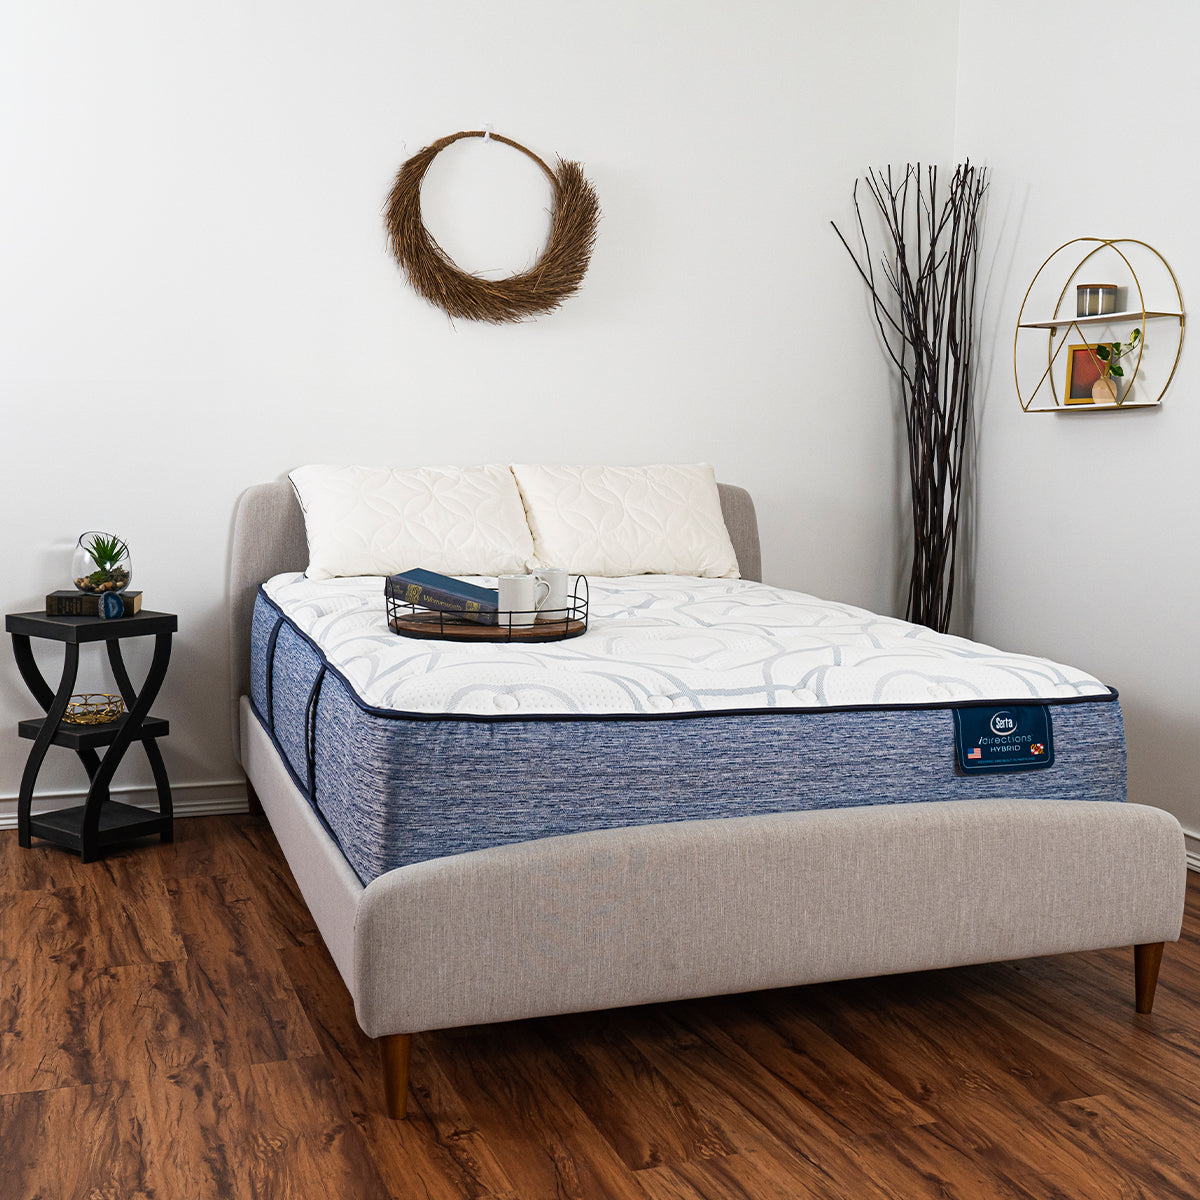 Serta iDirections X7 Hybrid II Plush Mattress On Bed Frame In Bedroom With Serving Tray Holding Coffee Mugs And Book